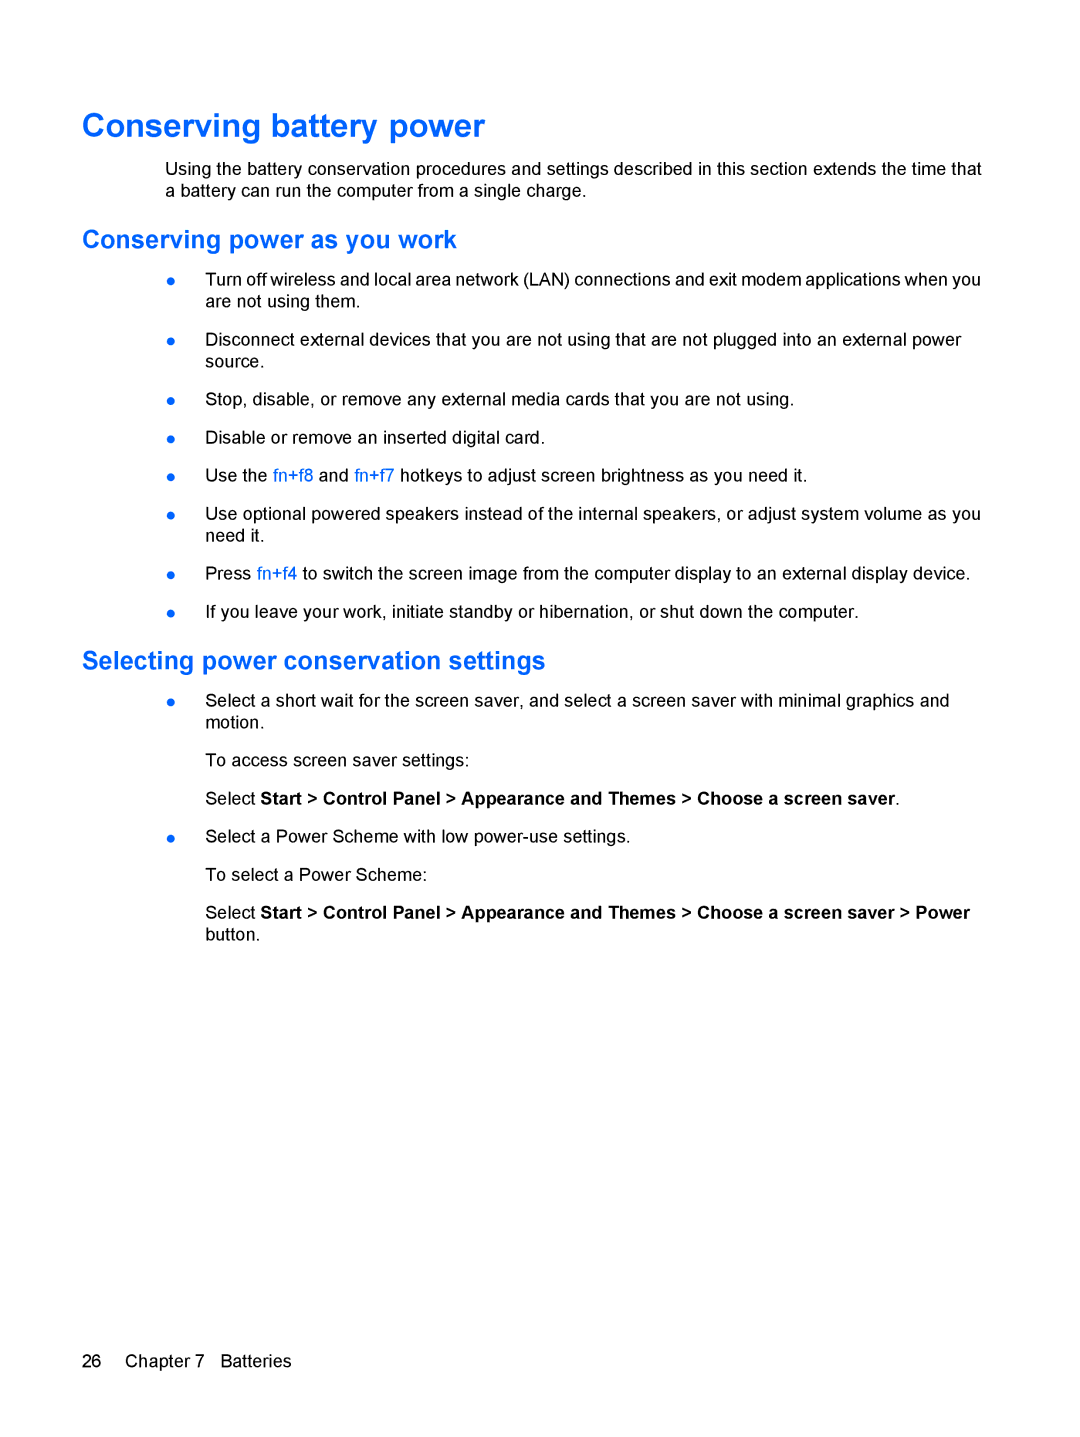 HP Power Management manual Conserving battery power, Conserving power as you work, Selecting power conservation settings 